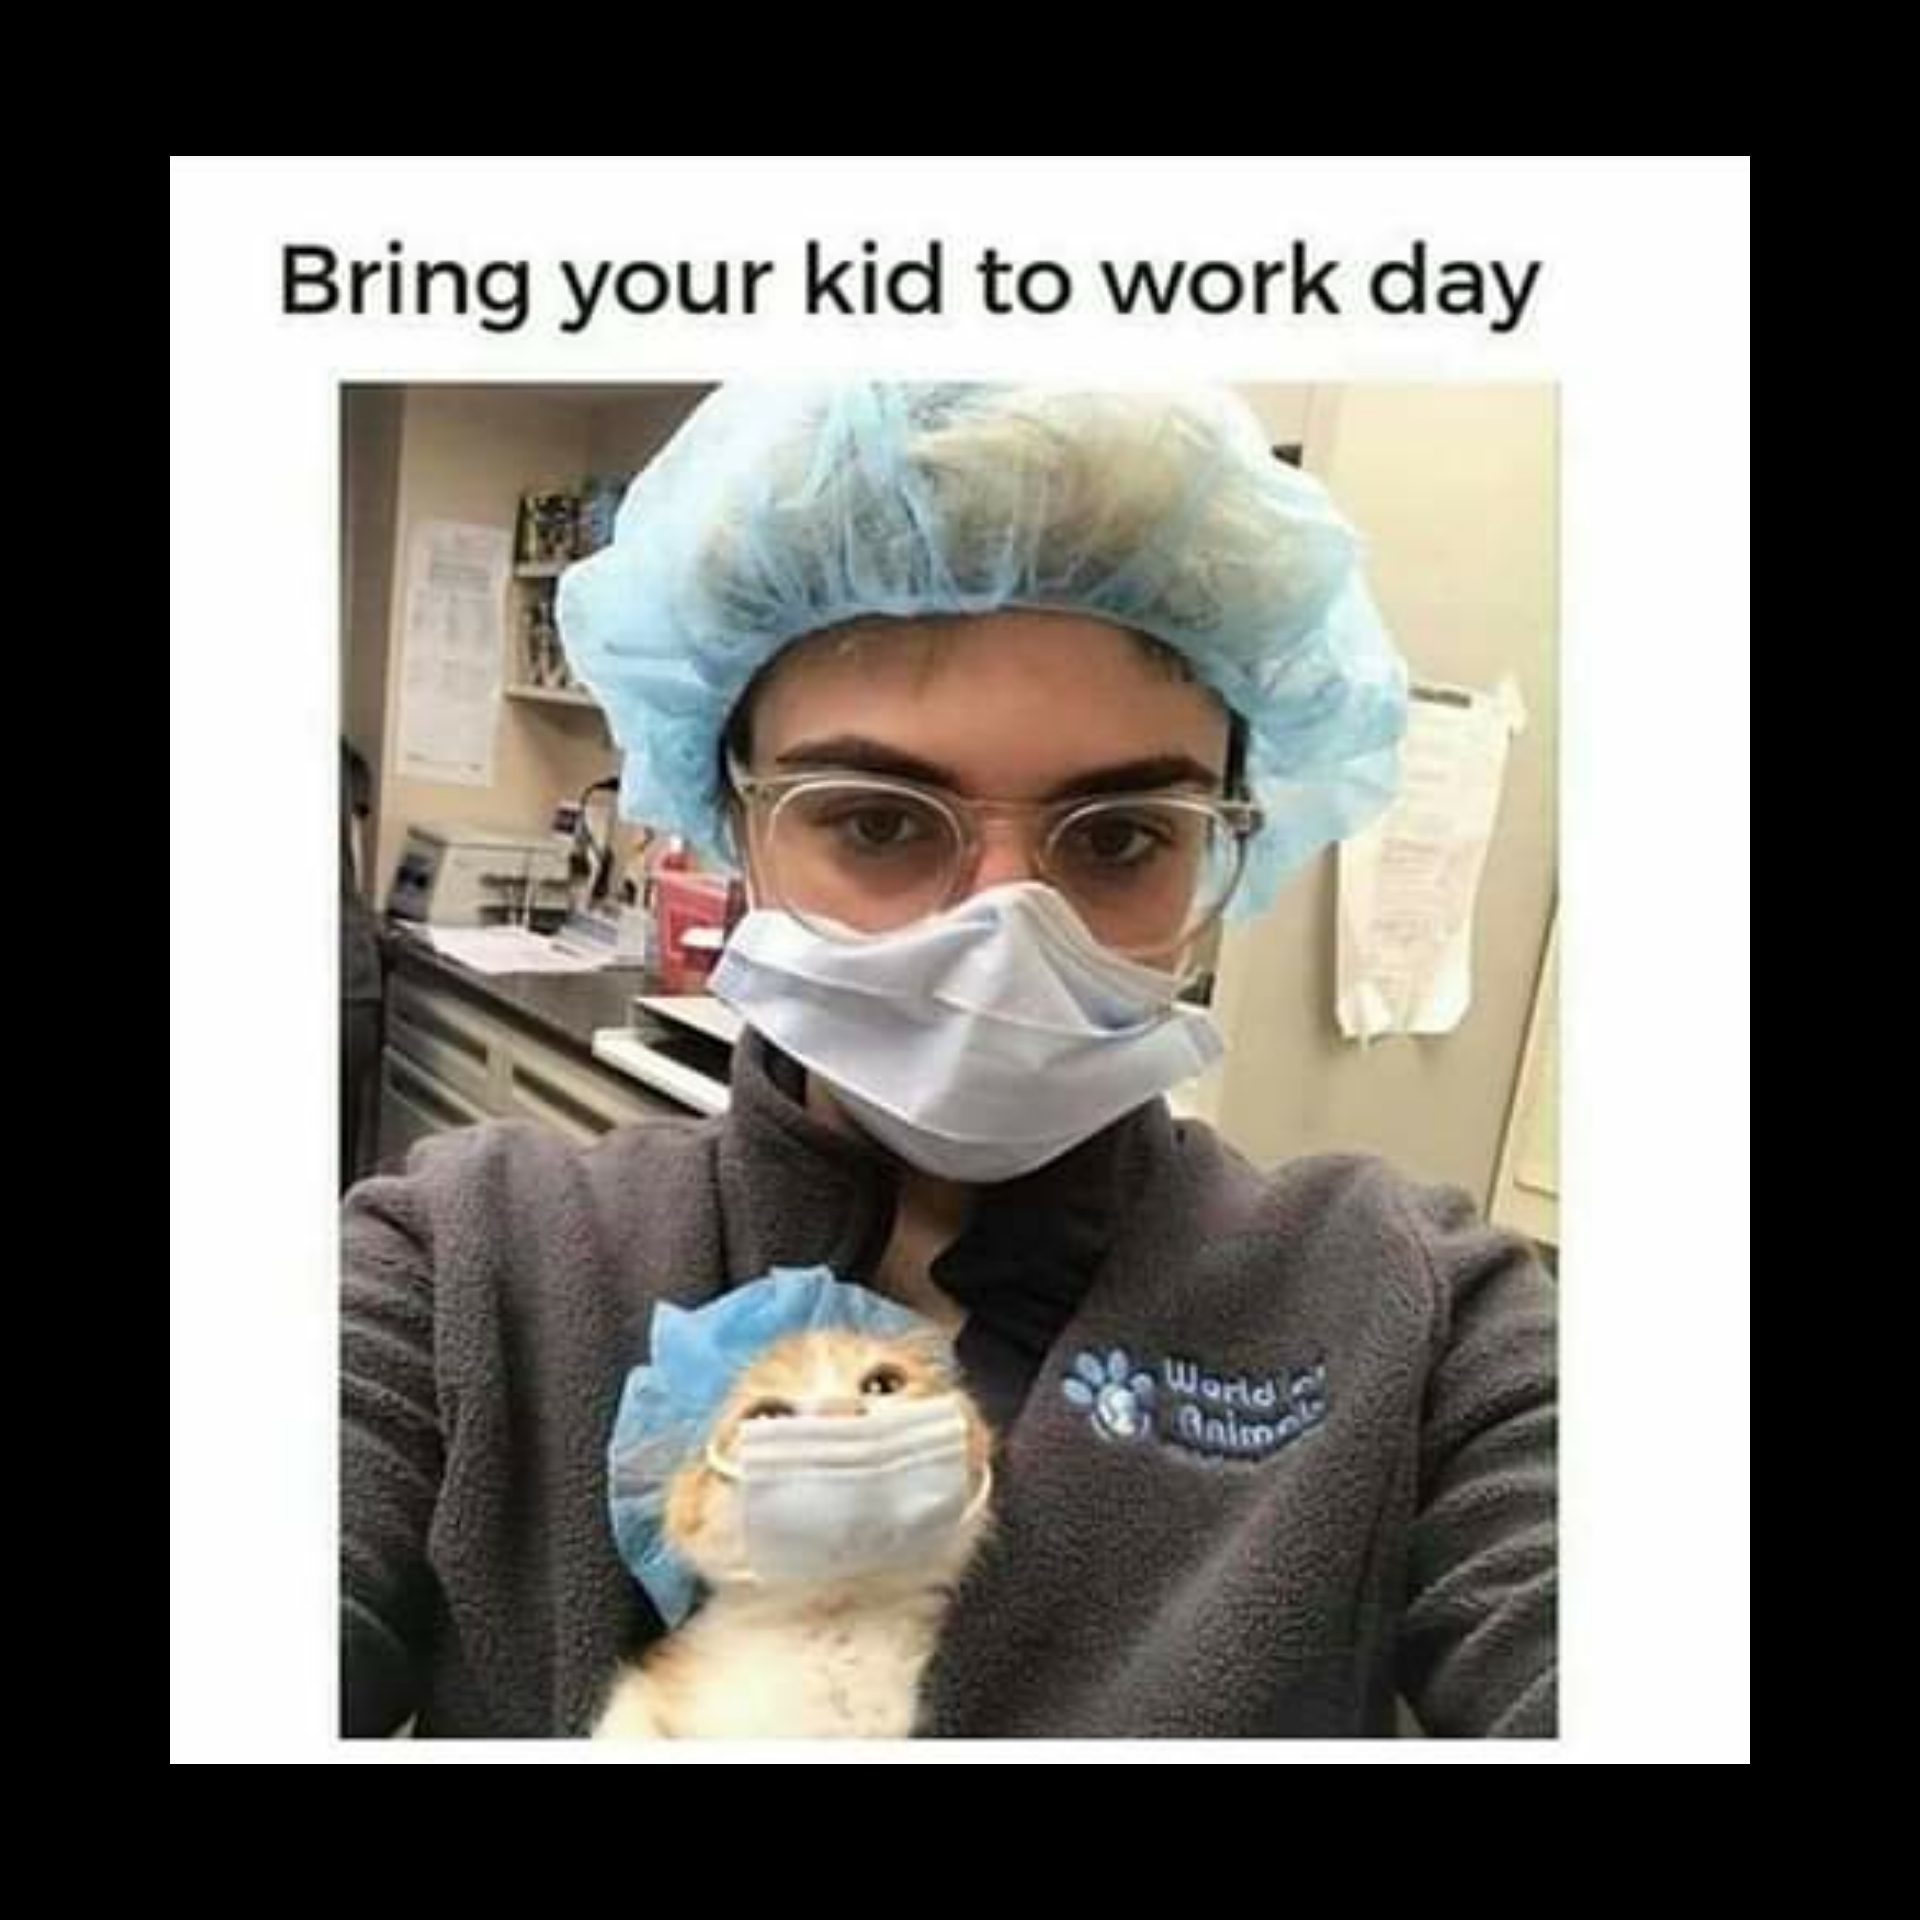 cat working - Bring your kid to work day